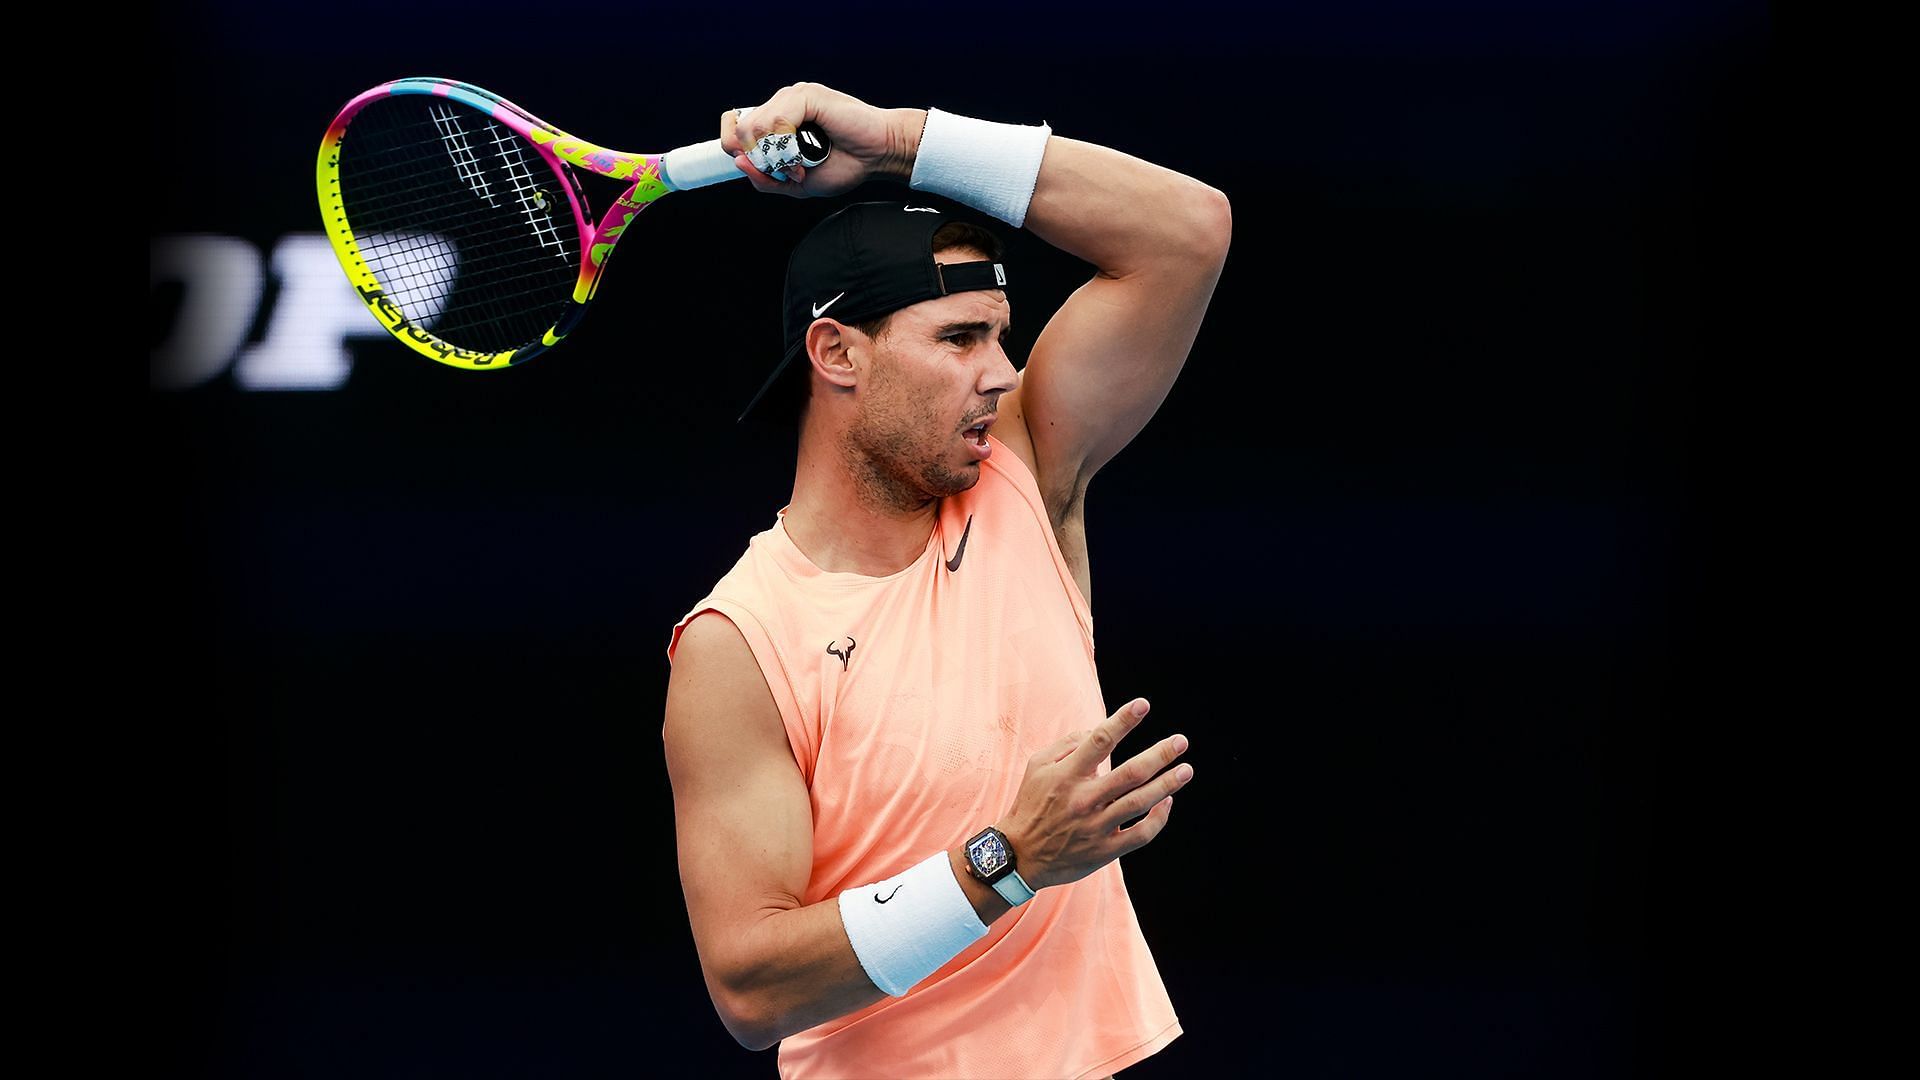 Rafael Nadal is currently ranked 2nd